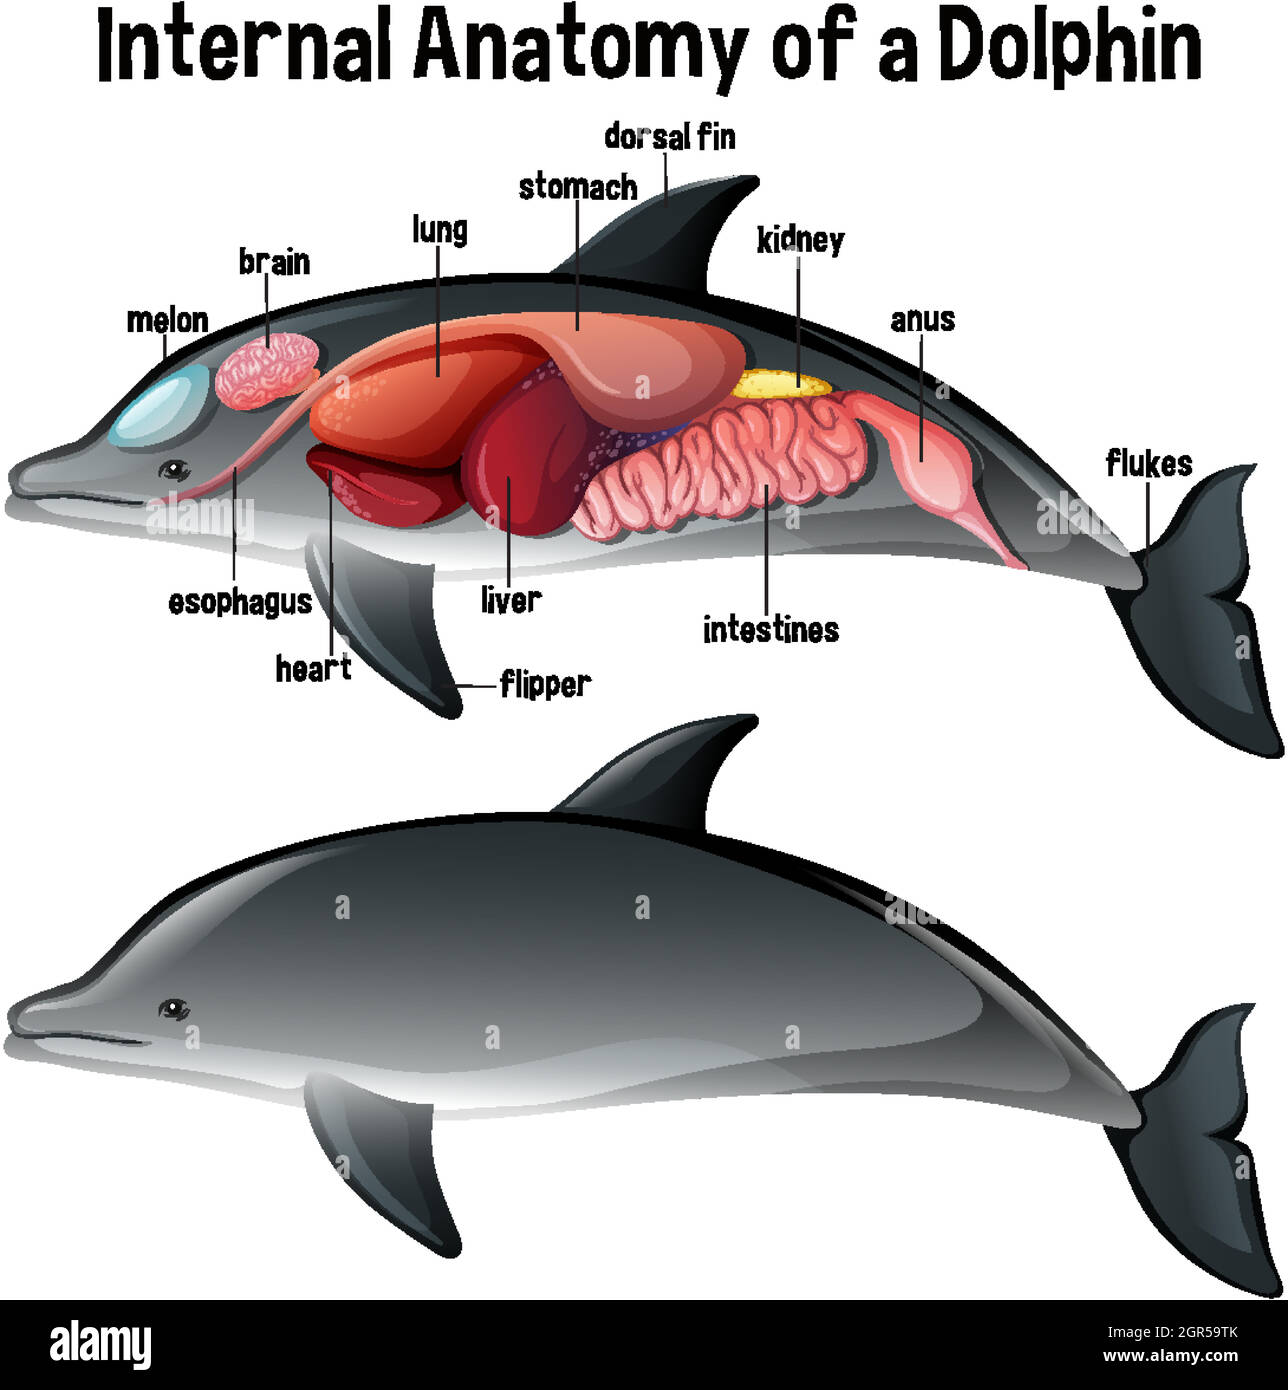 Internal Anatomy of a Dolphin with label Stock Vector